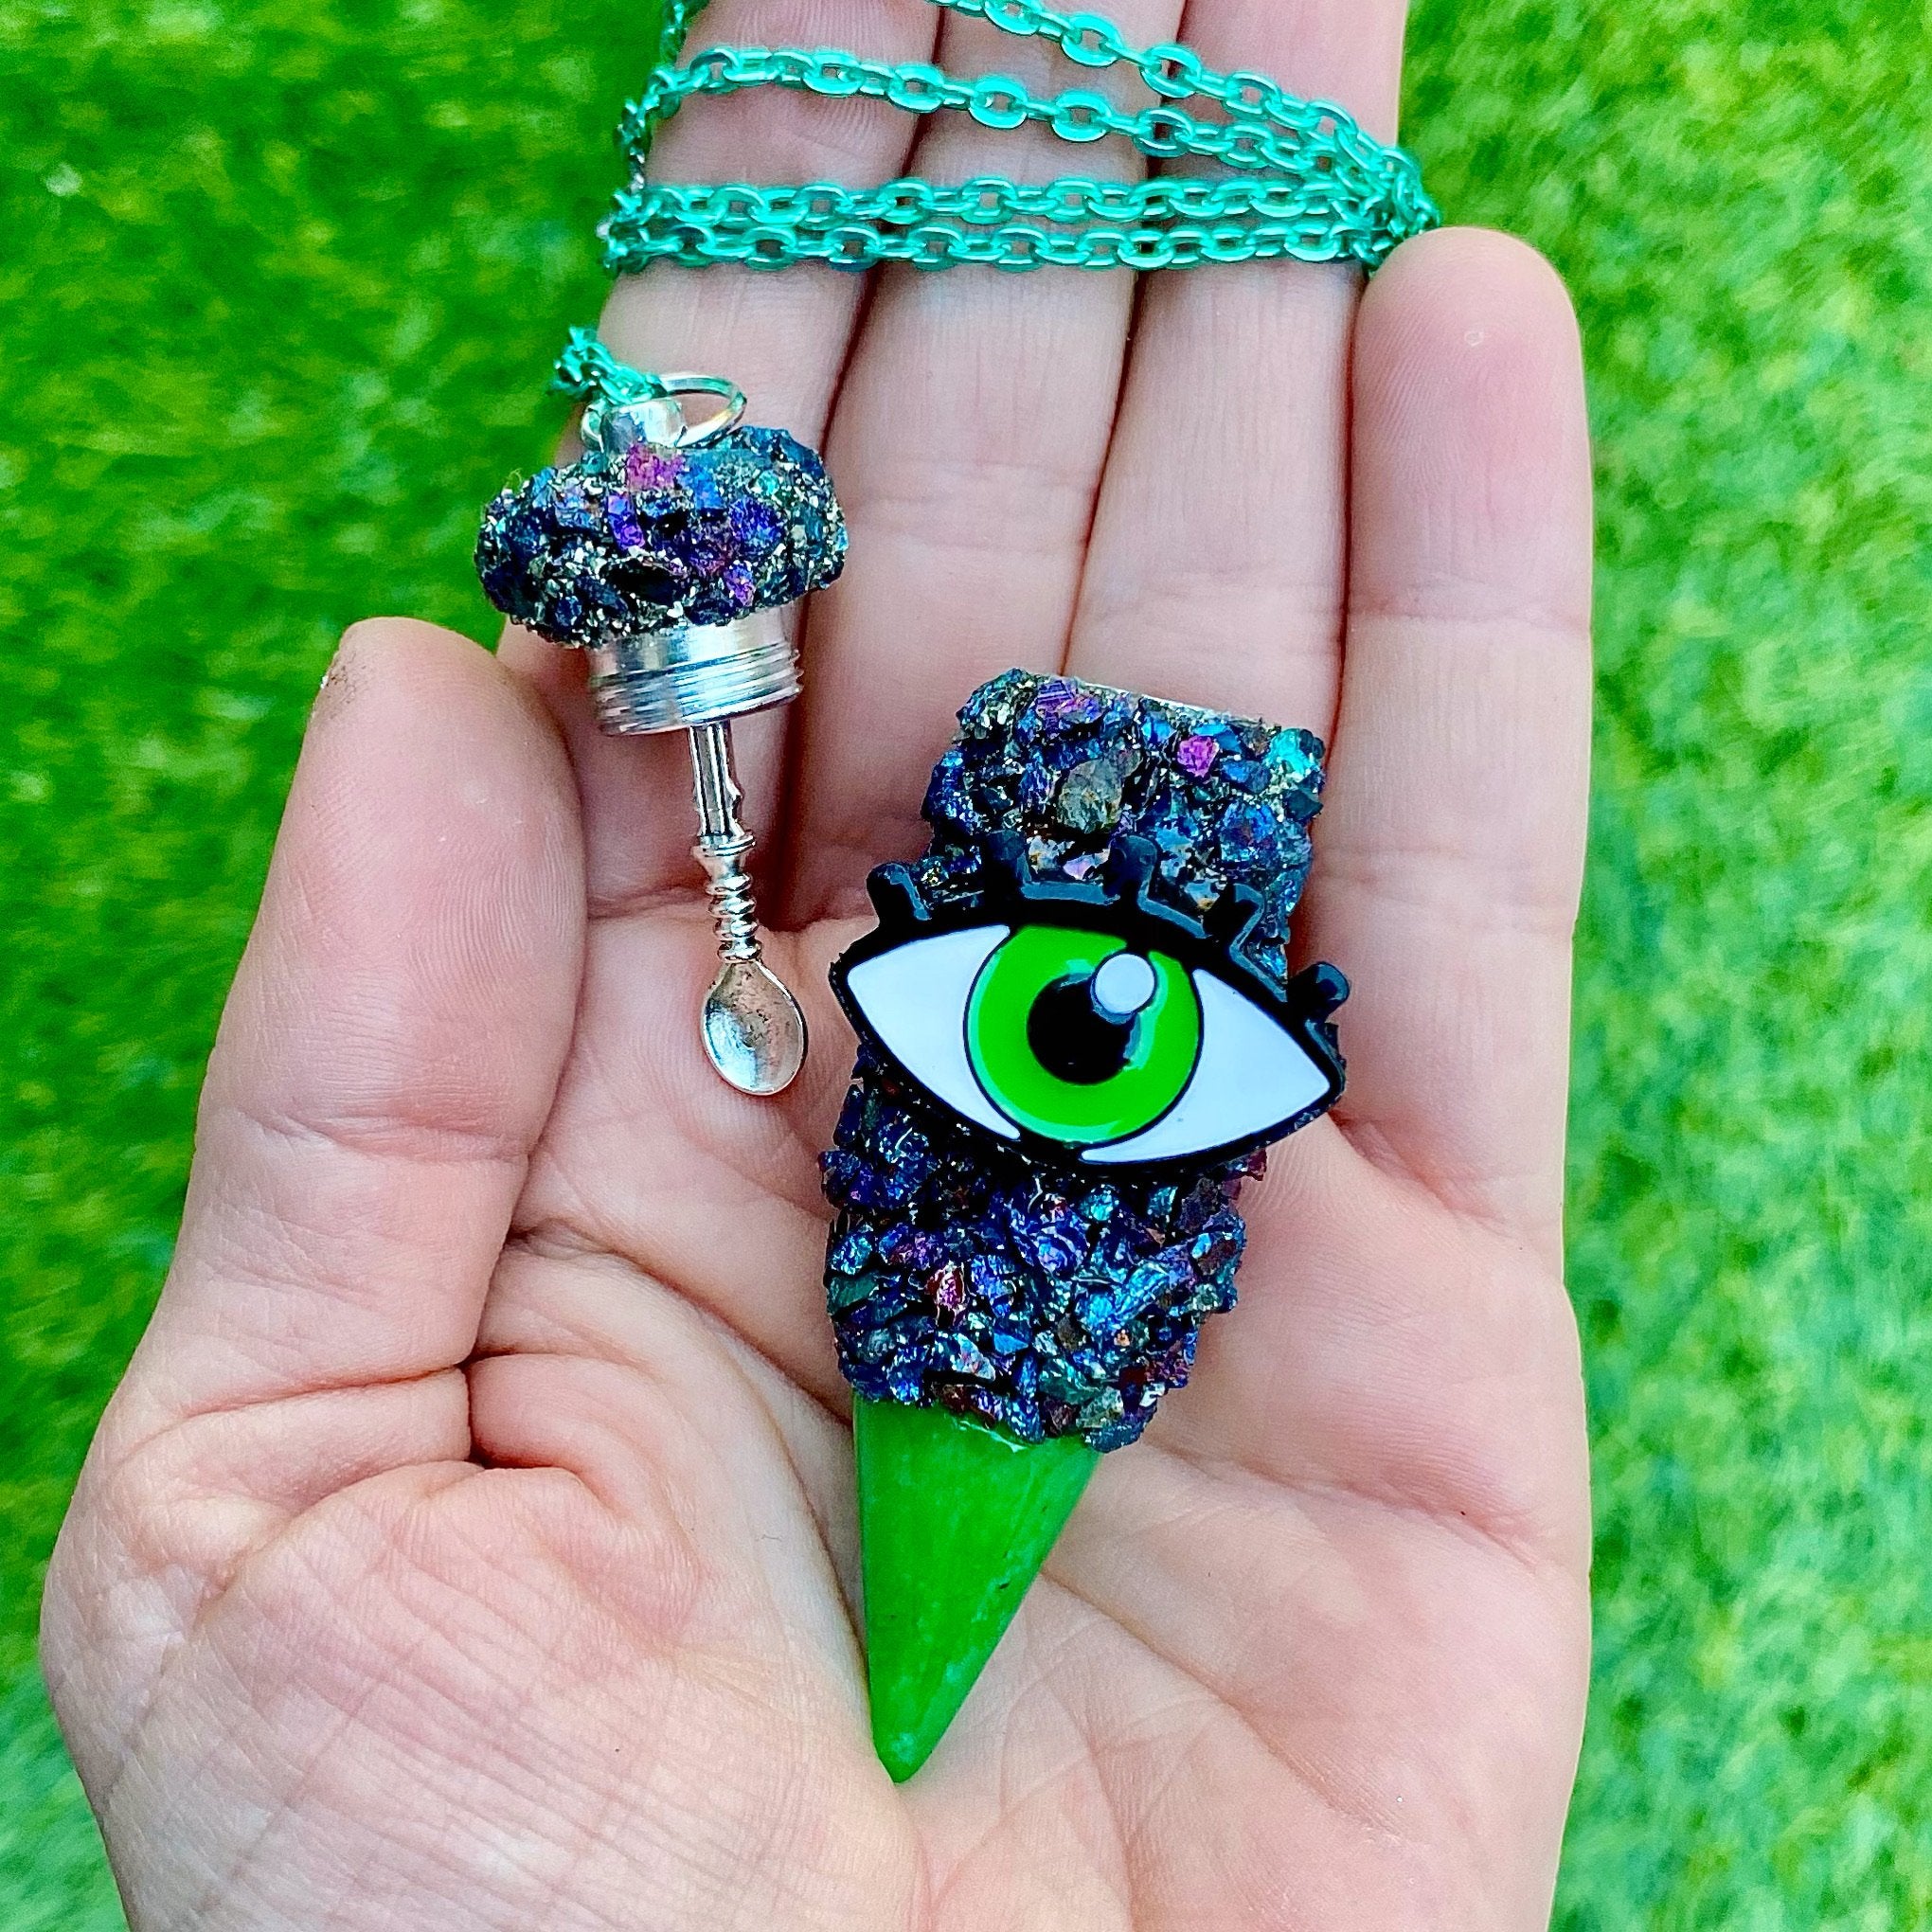 Rave Necklace Customized Pendant + Spoon Inside Lid